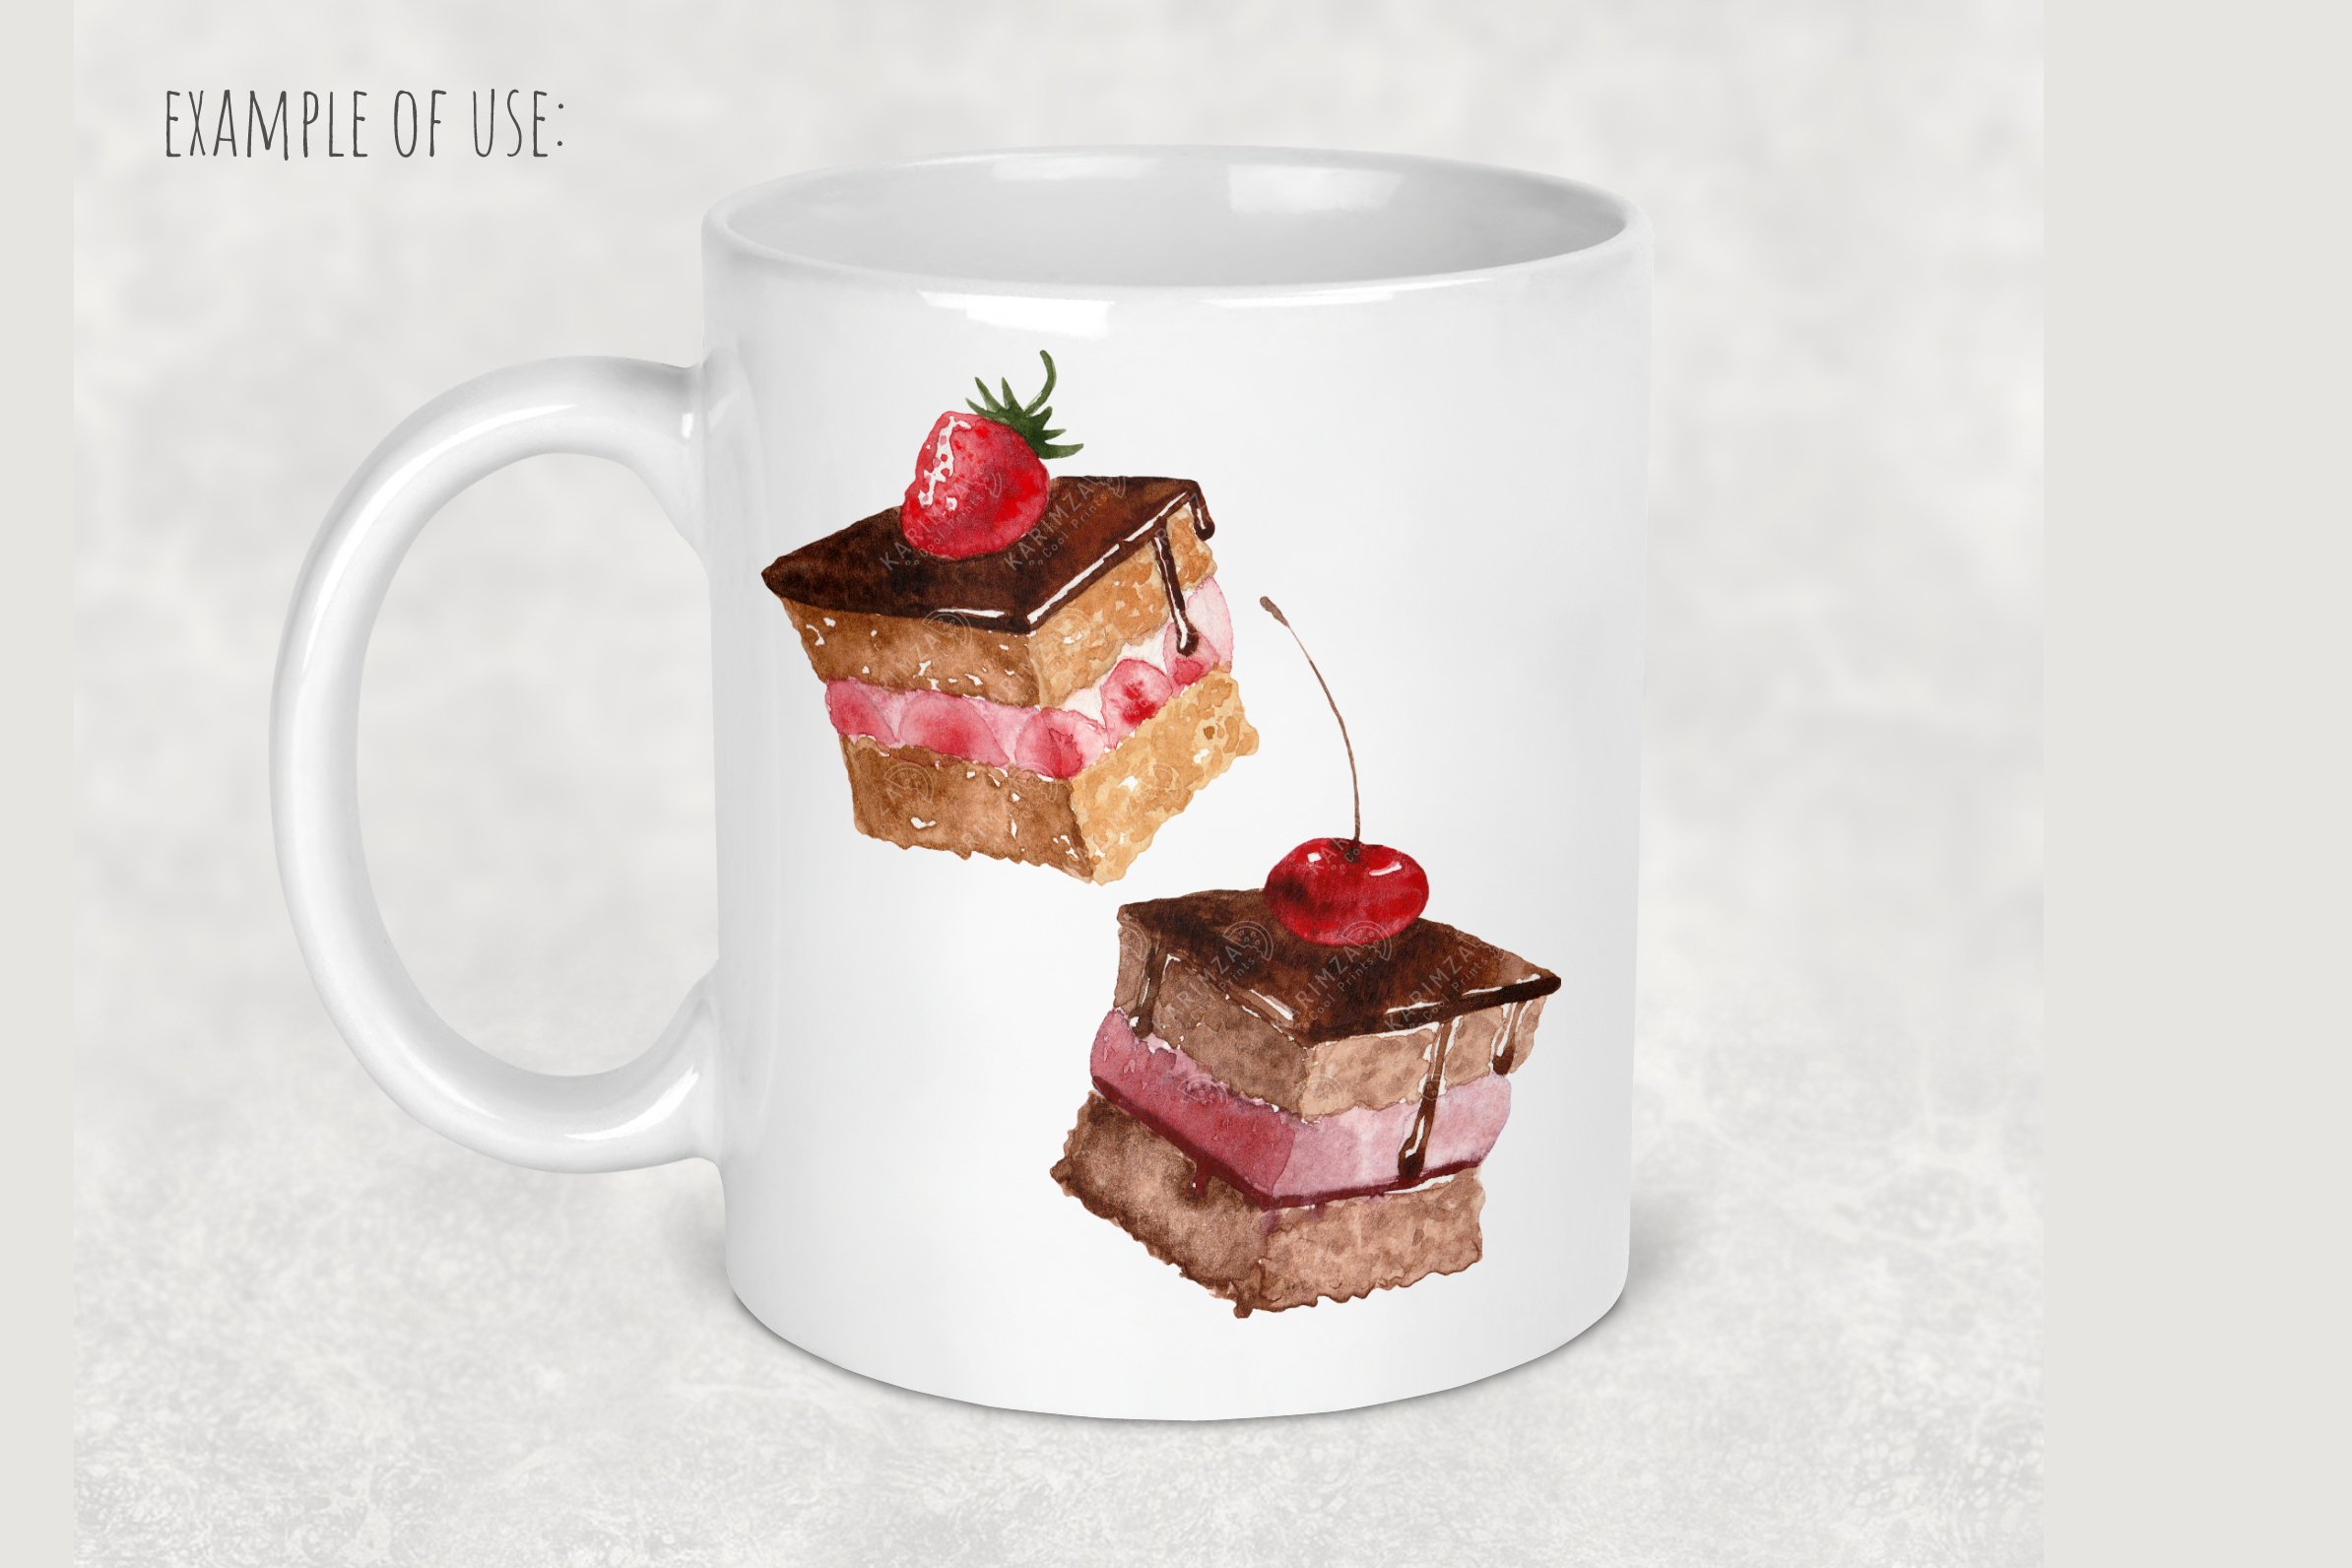 Classic big white tea cup with the dessert illustration.